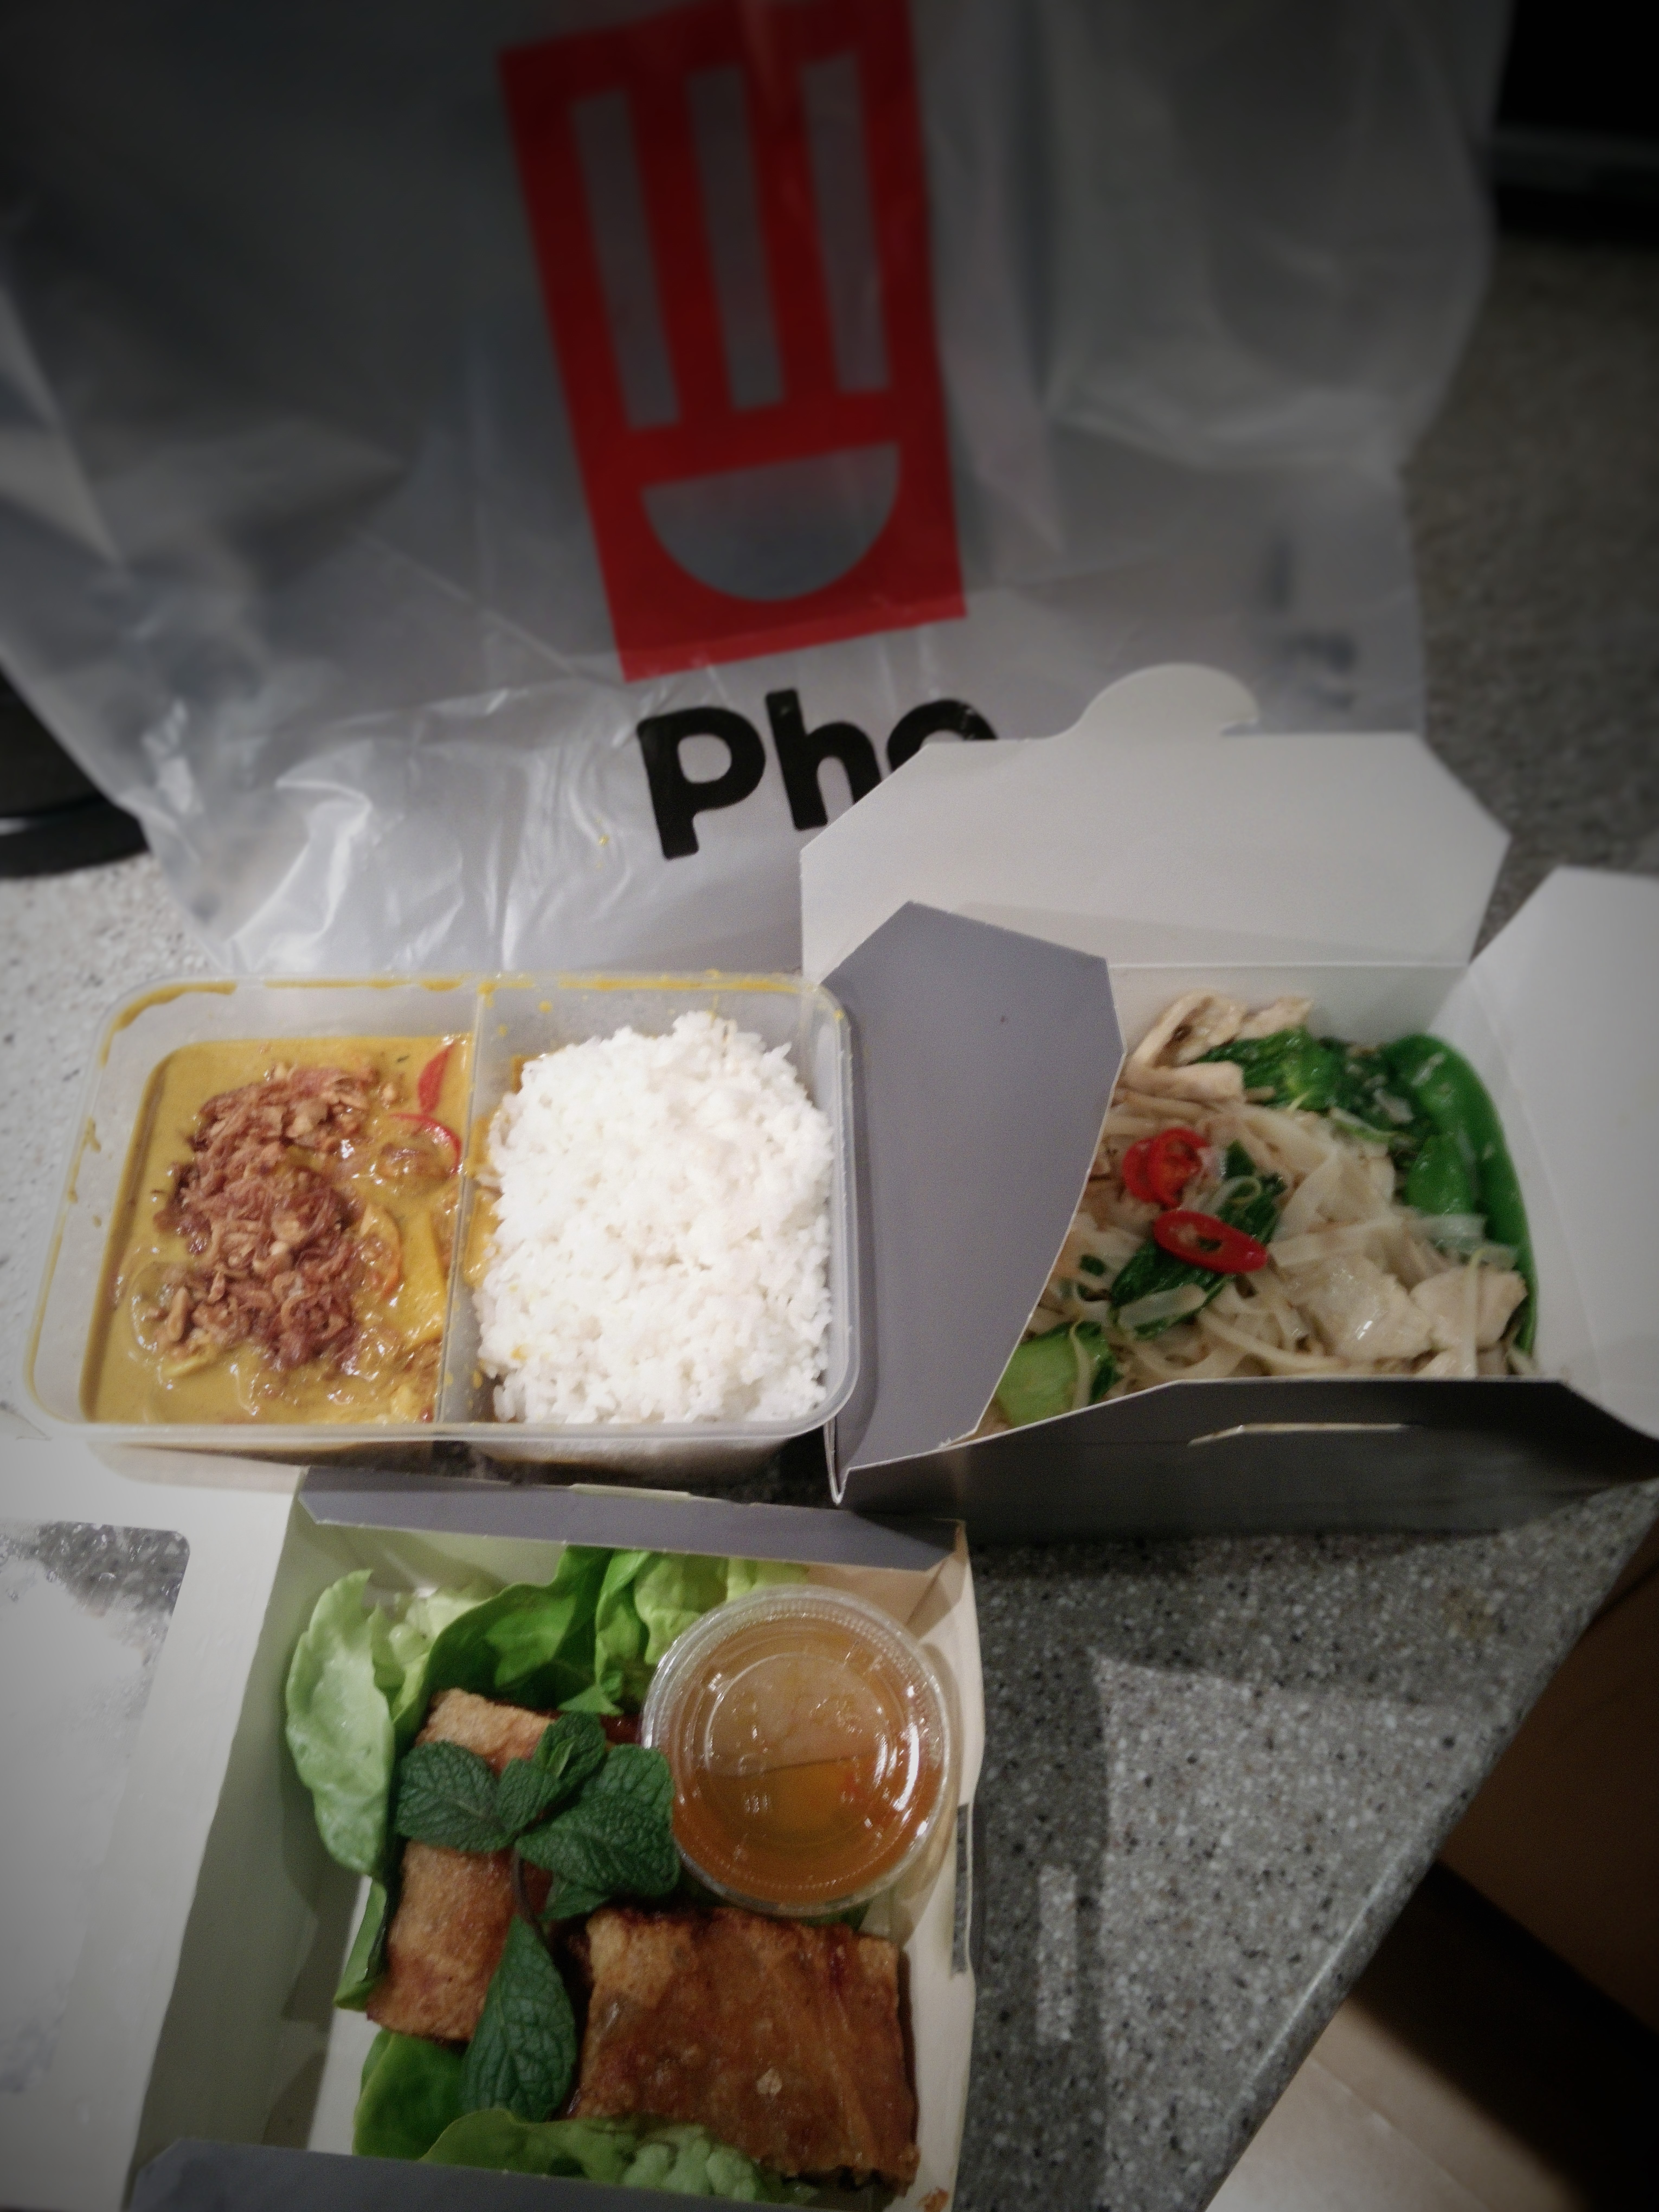 Deliveroo Round 4! – Pho to Finish